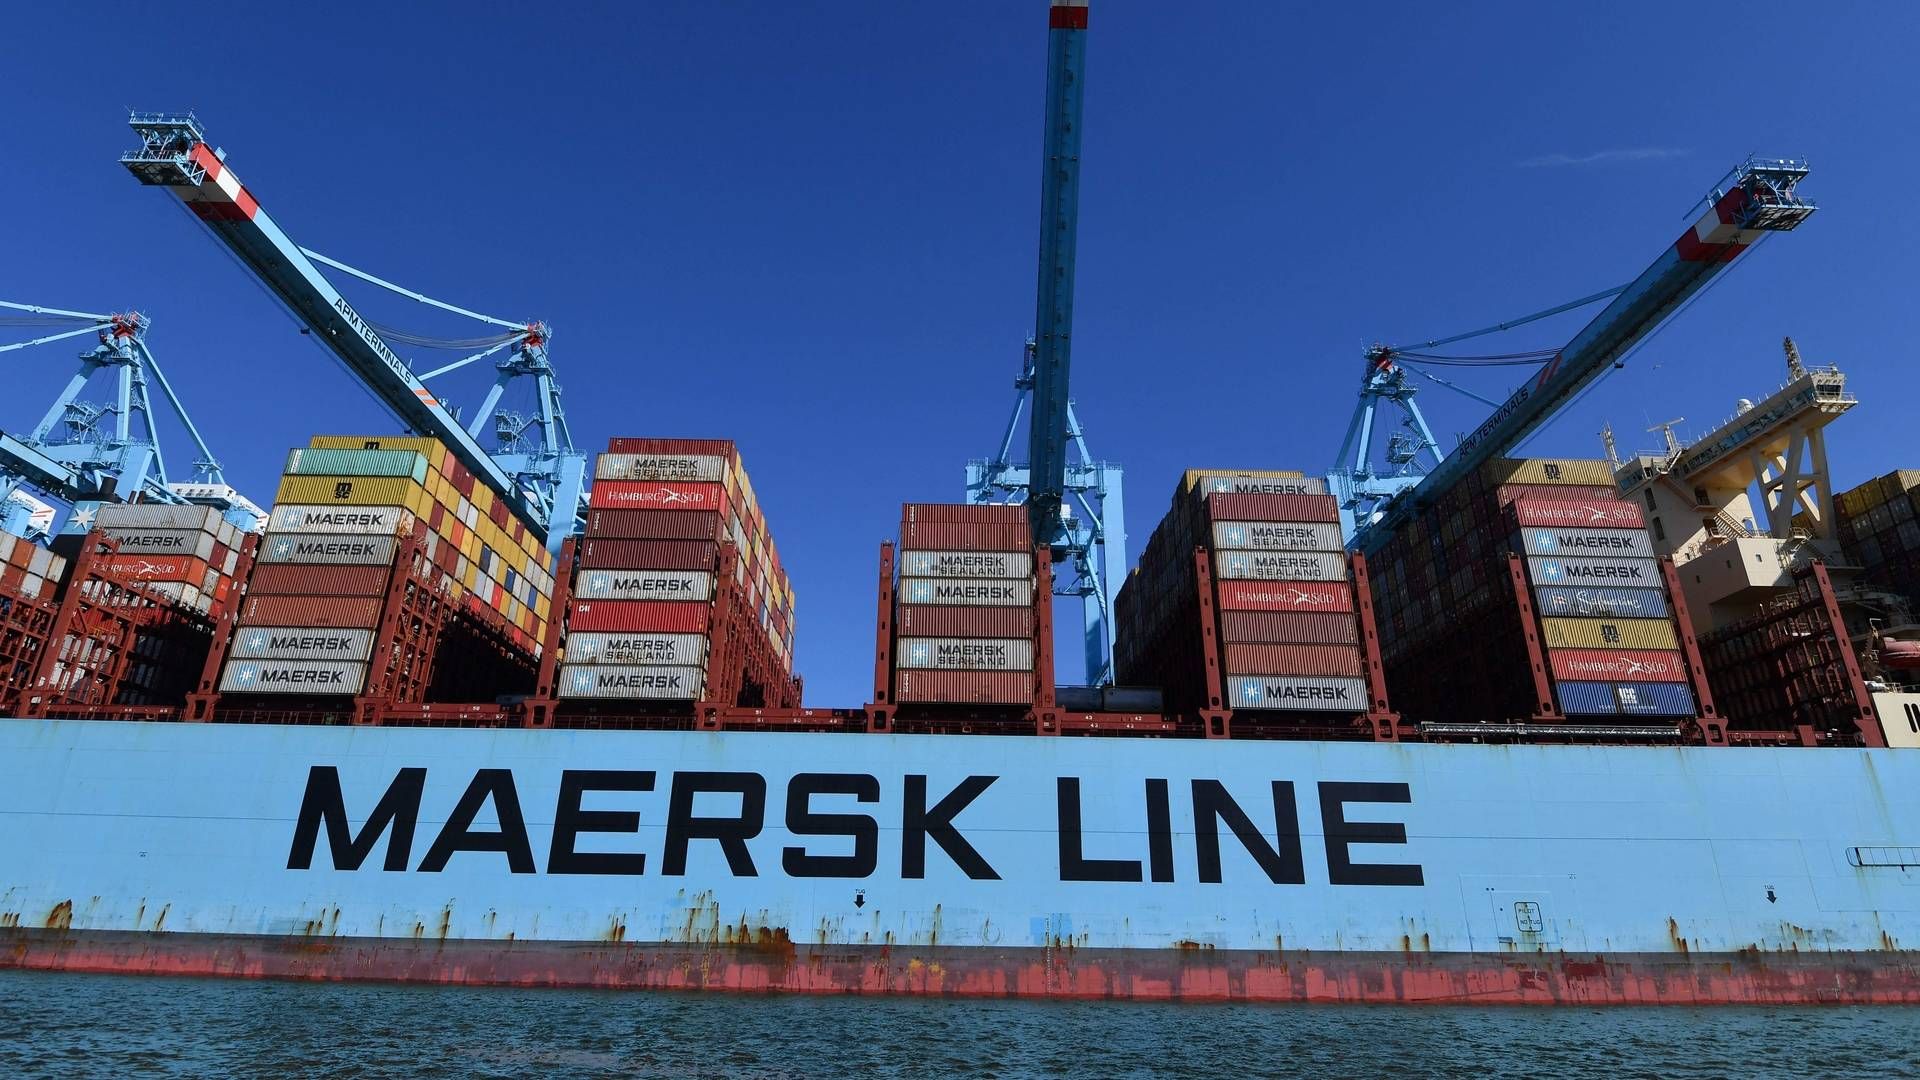 A large increase in freight rates has led to high profits at Maersk. | Photo: JOHN THYS/AFP / AFP